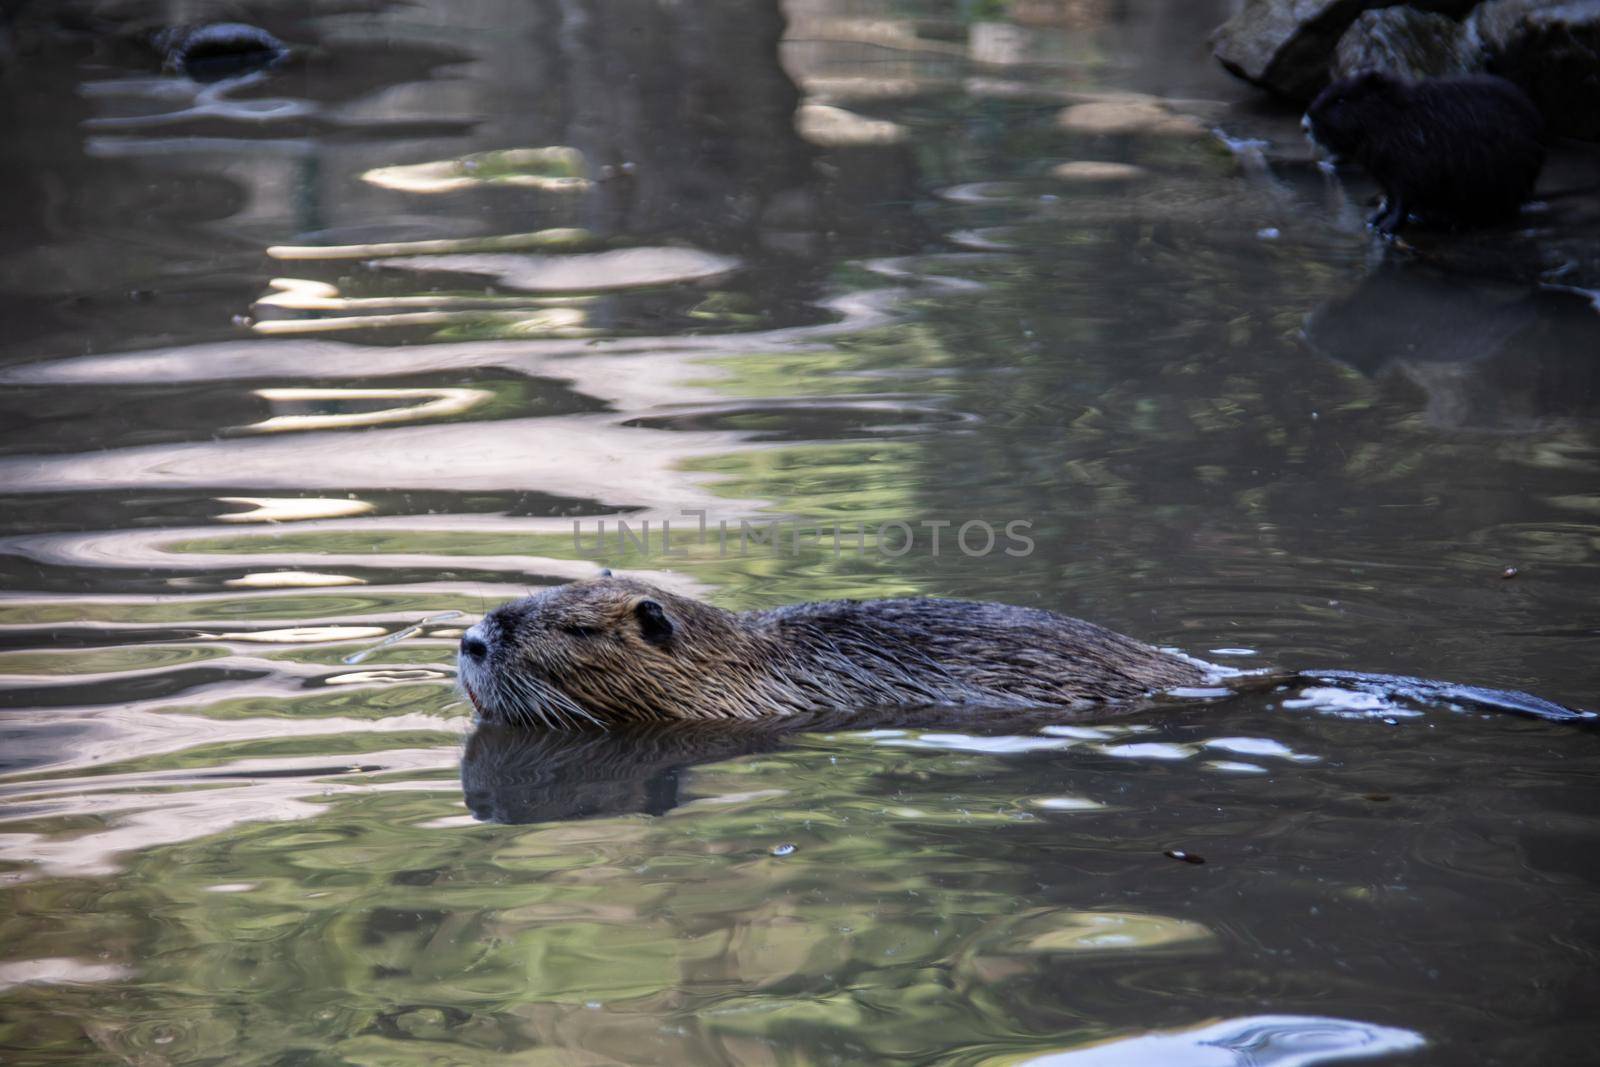 Nutria clean themselves and swim in the pond